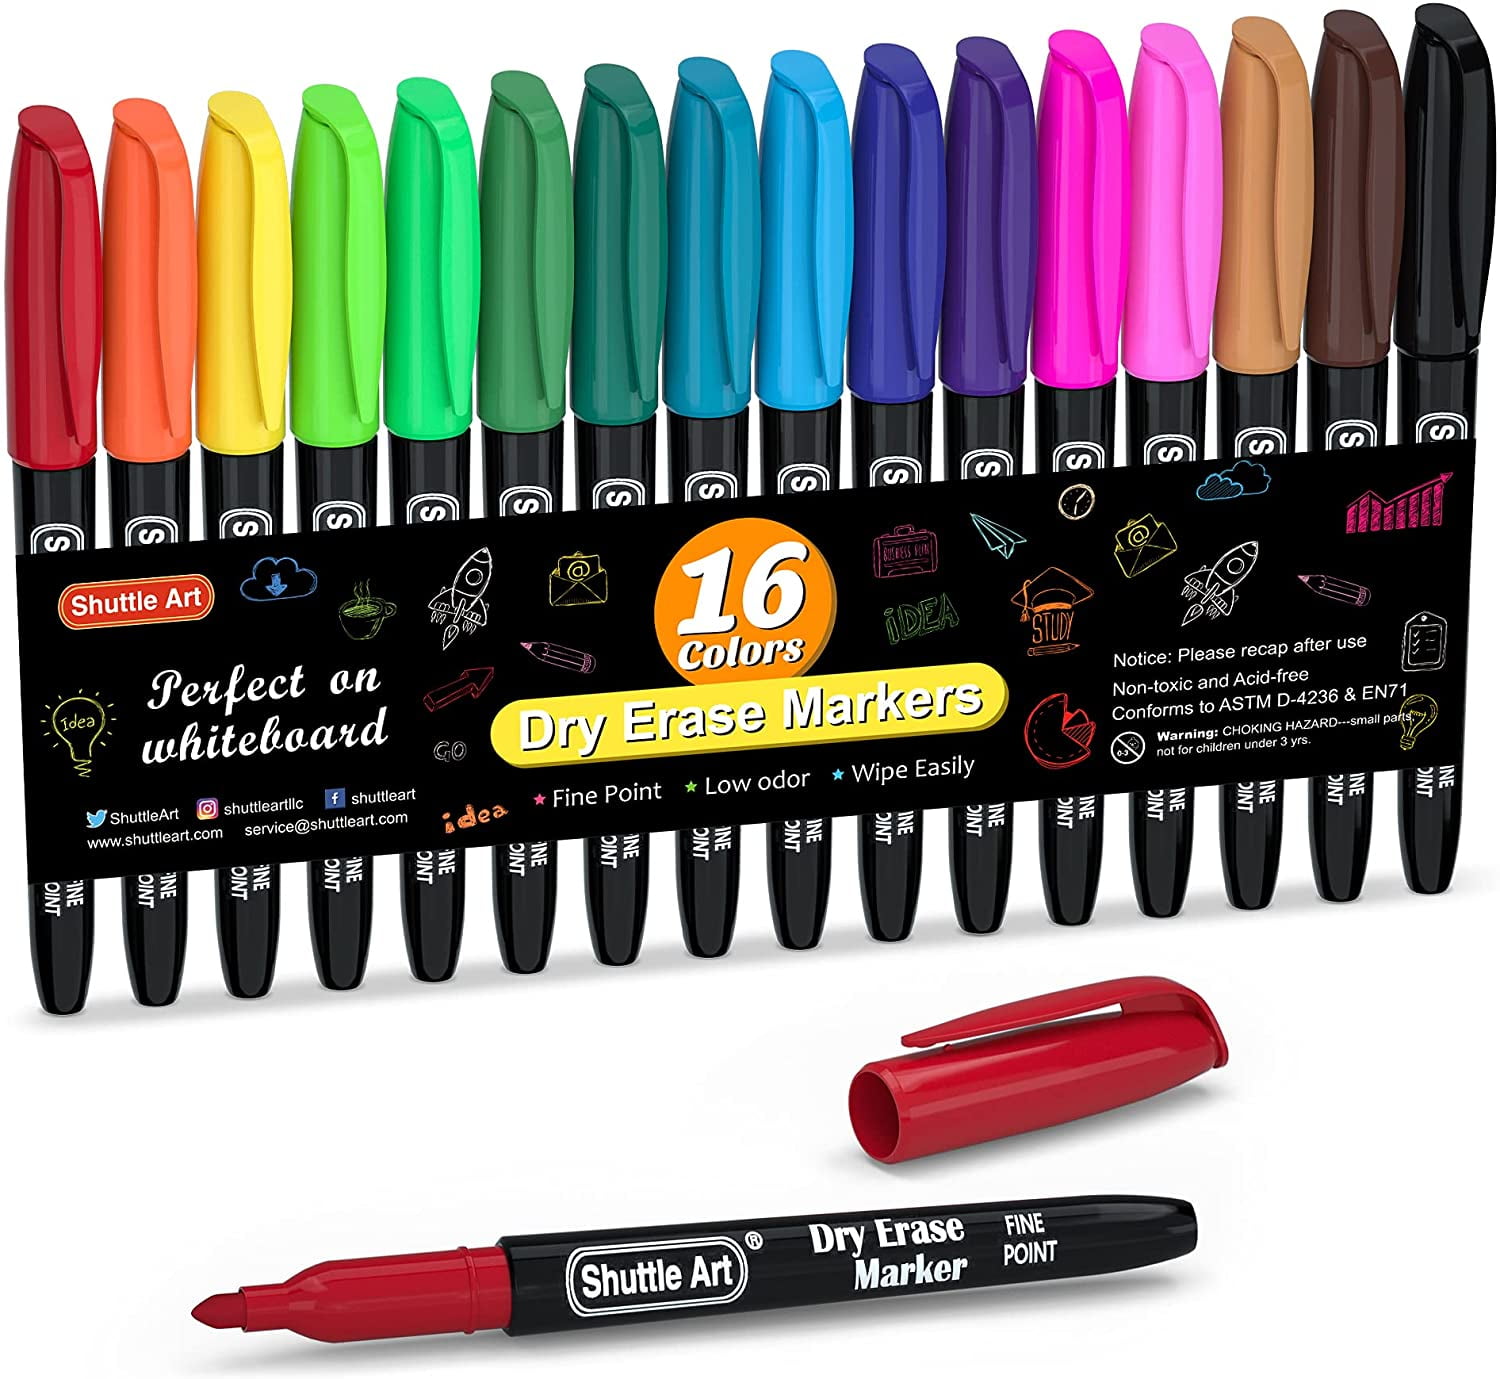 Shuttle Art Dry Erase Markers, 16 Colors Whiteboard Markers,Fine Tip Dry Erase Markers for Kids,Perfect for Writing on Whiteboards, Dry-Erase Boards